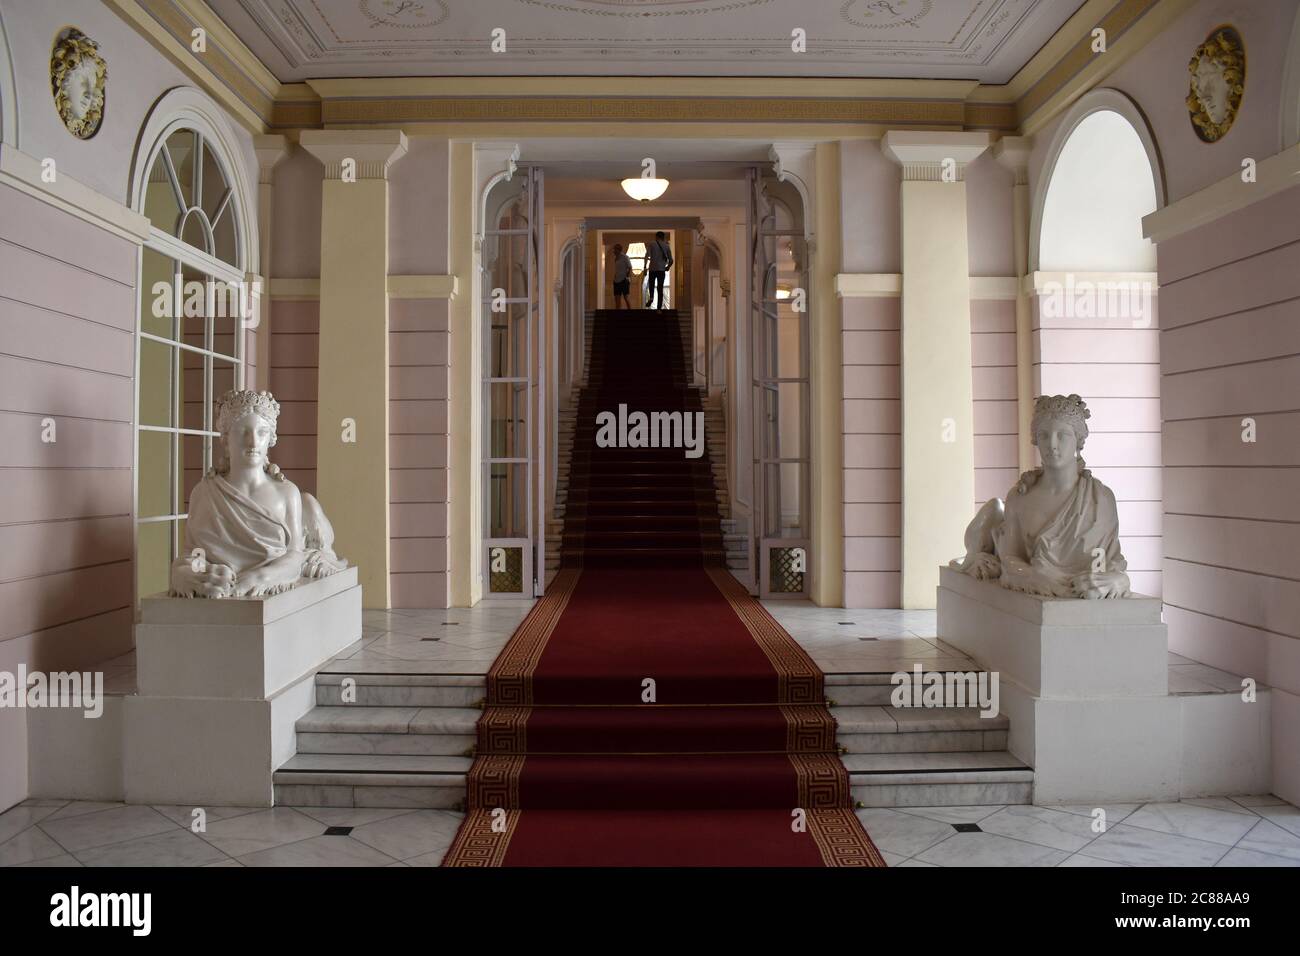 Albertina Museum. Front staircase with two sphinxes. Stock Photo